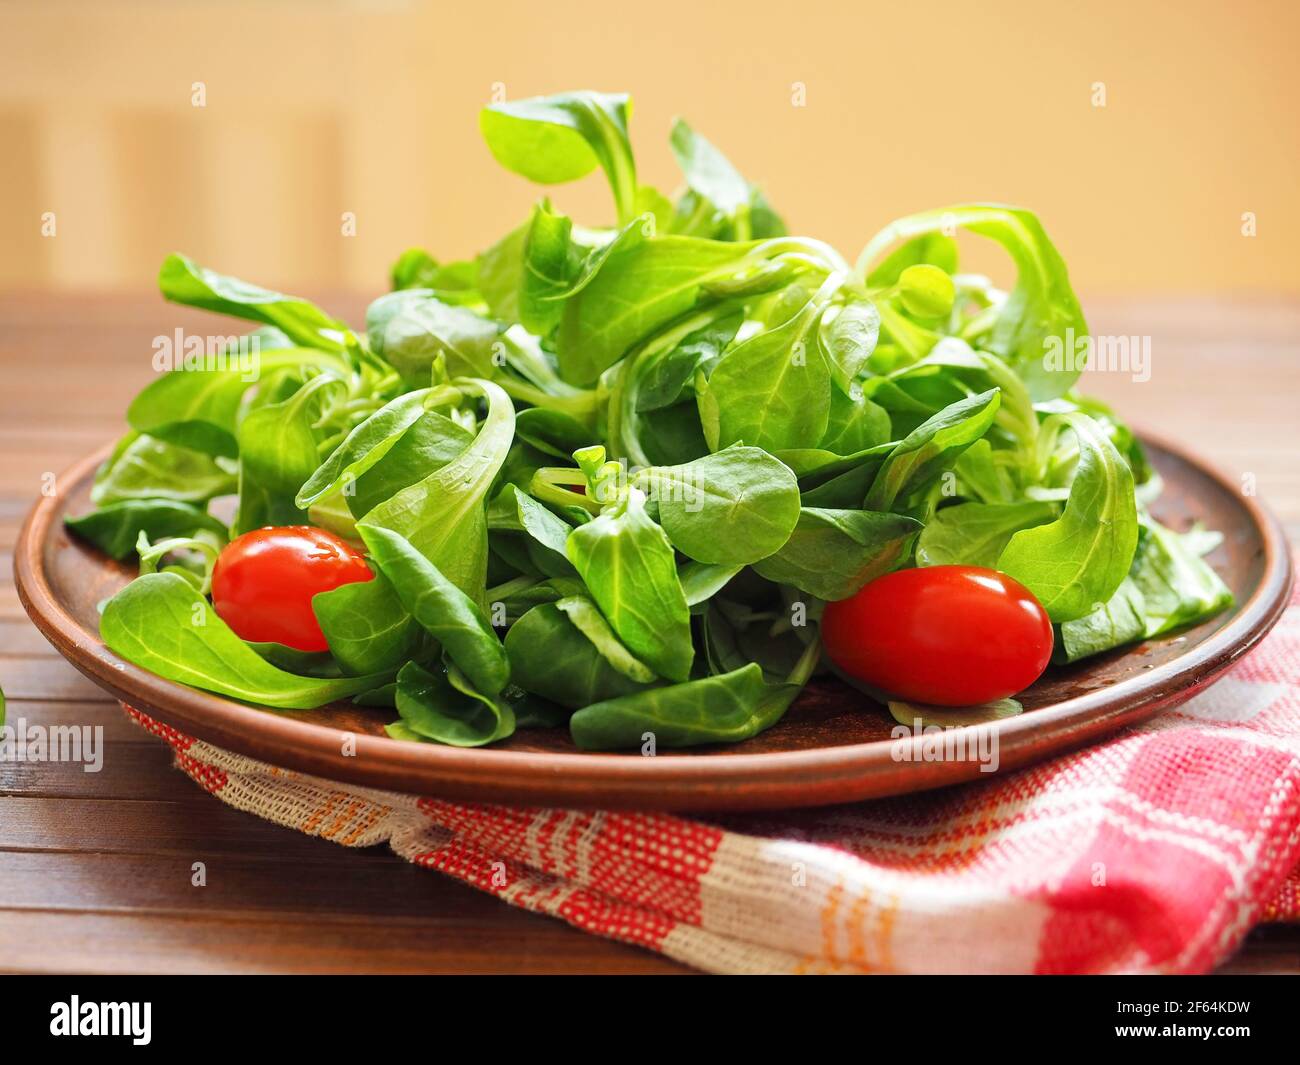 Wooden bowl with corn salad, lamb's lettuce and cherry tomatoes Stock Photo